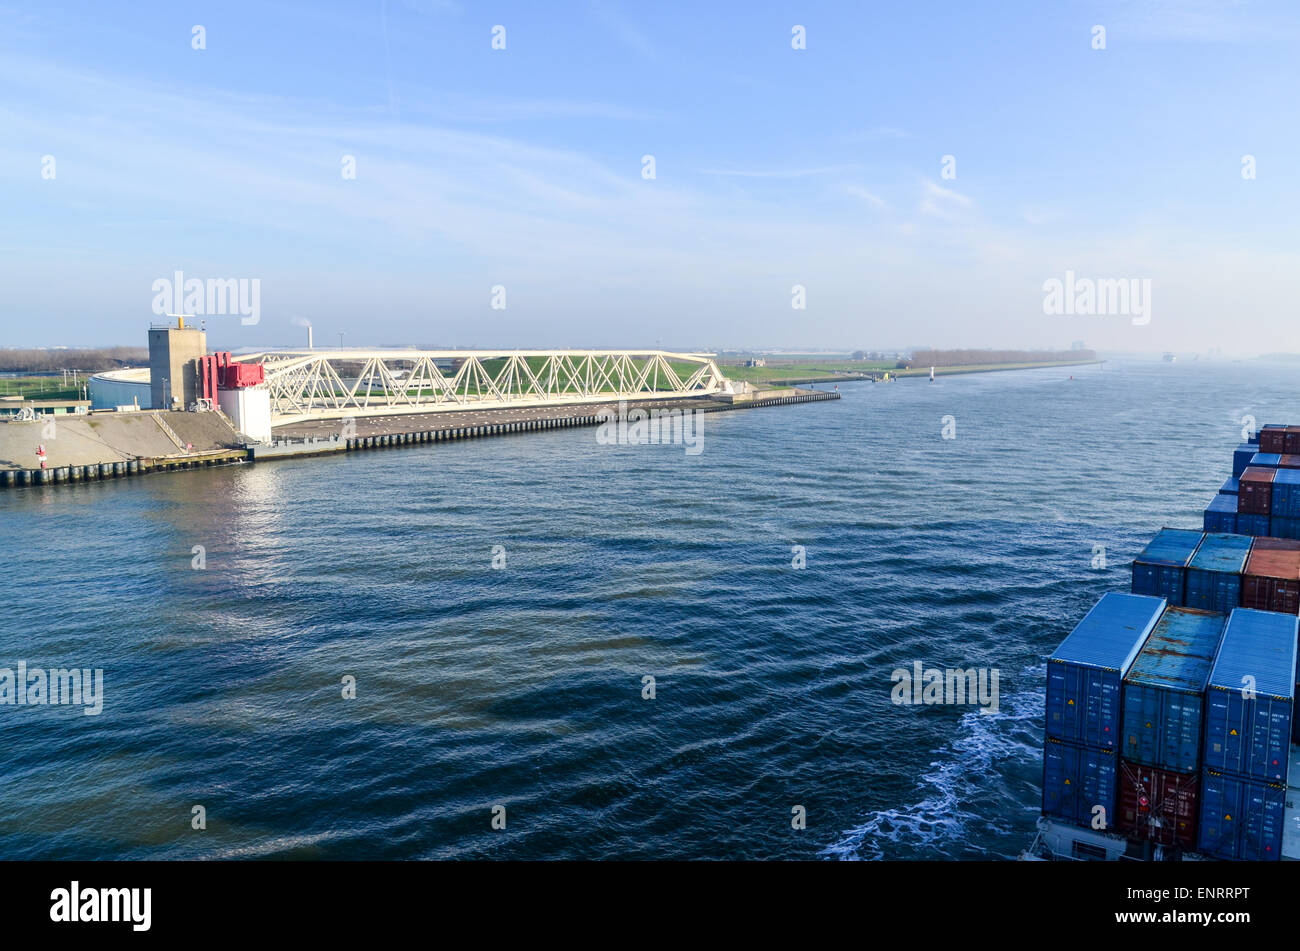 A cargo ship passing the Maeslantkering on the Nieuwe Waterweg, Rotterdam, a storm surge barrier Stock Photo